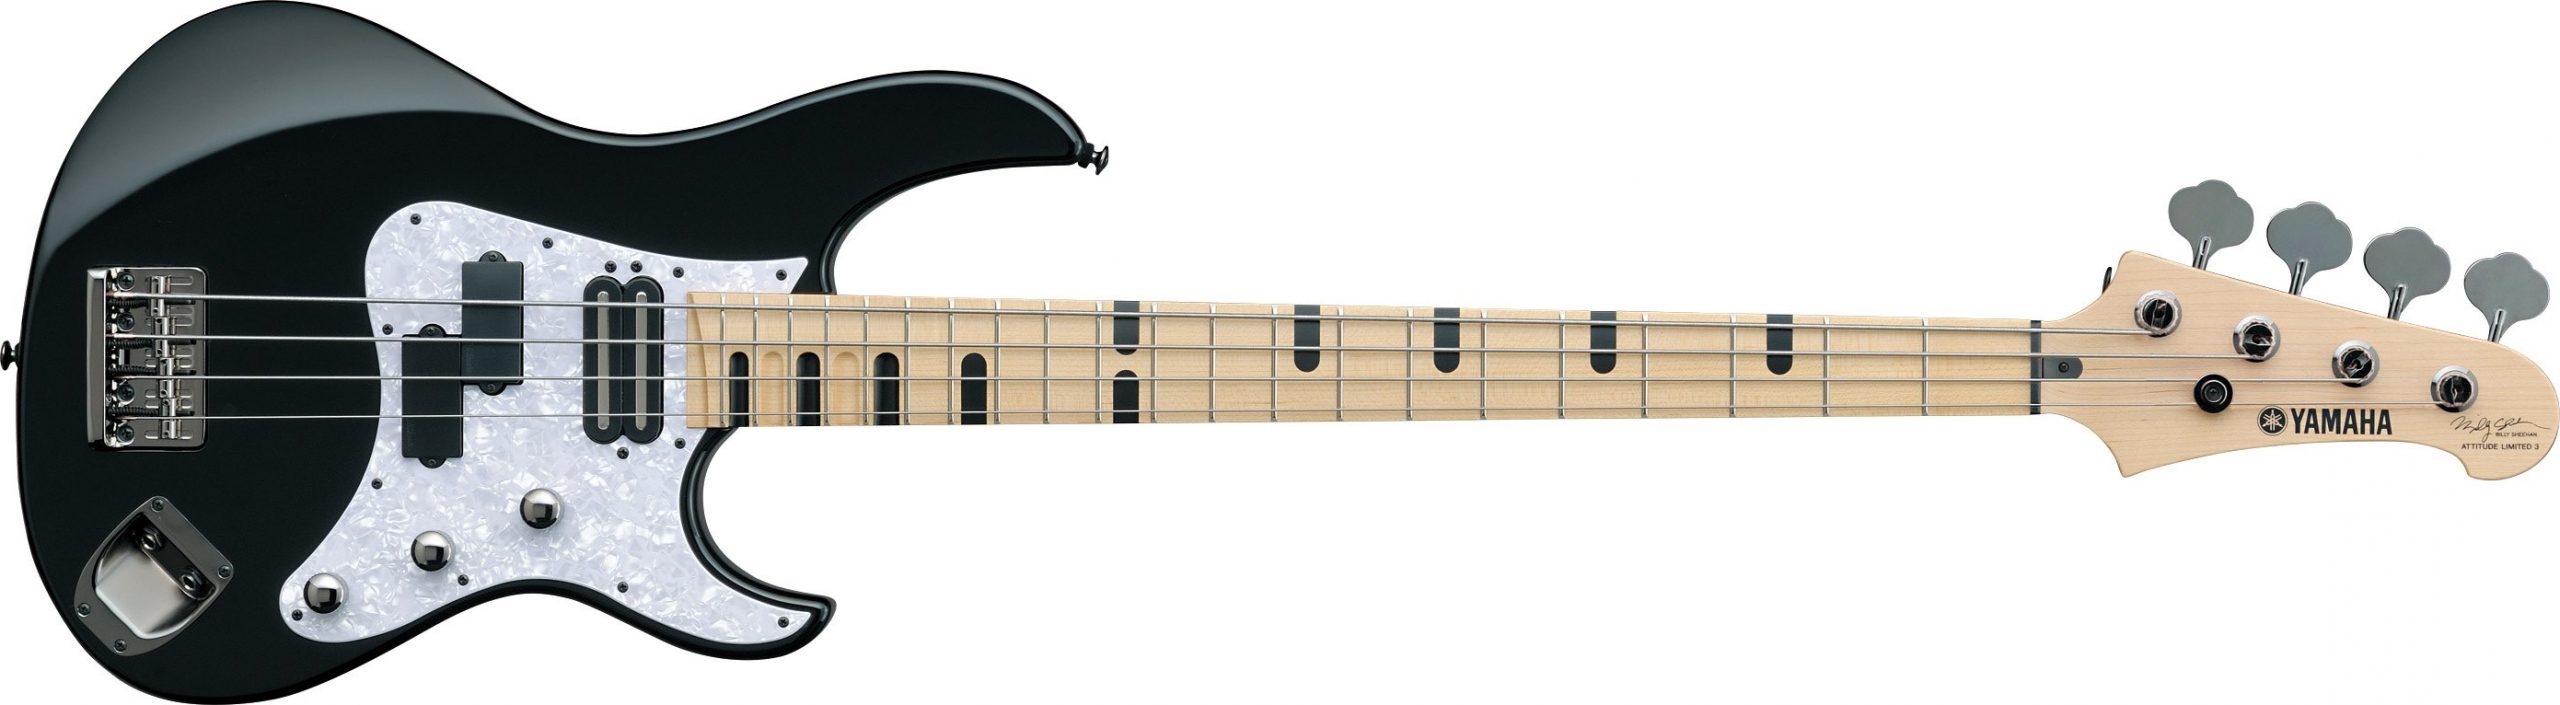 Black and white electric bass guitar.